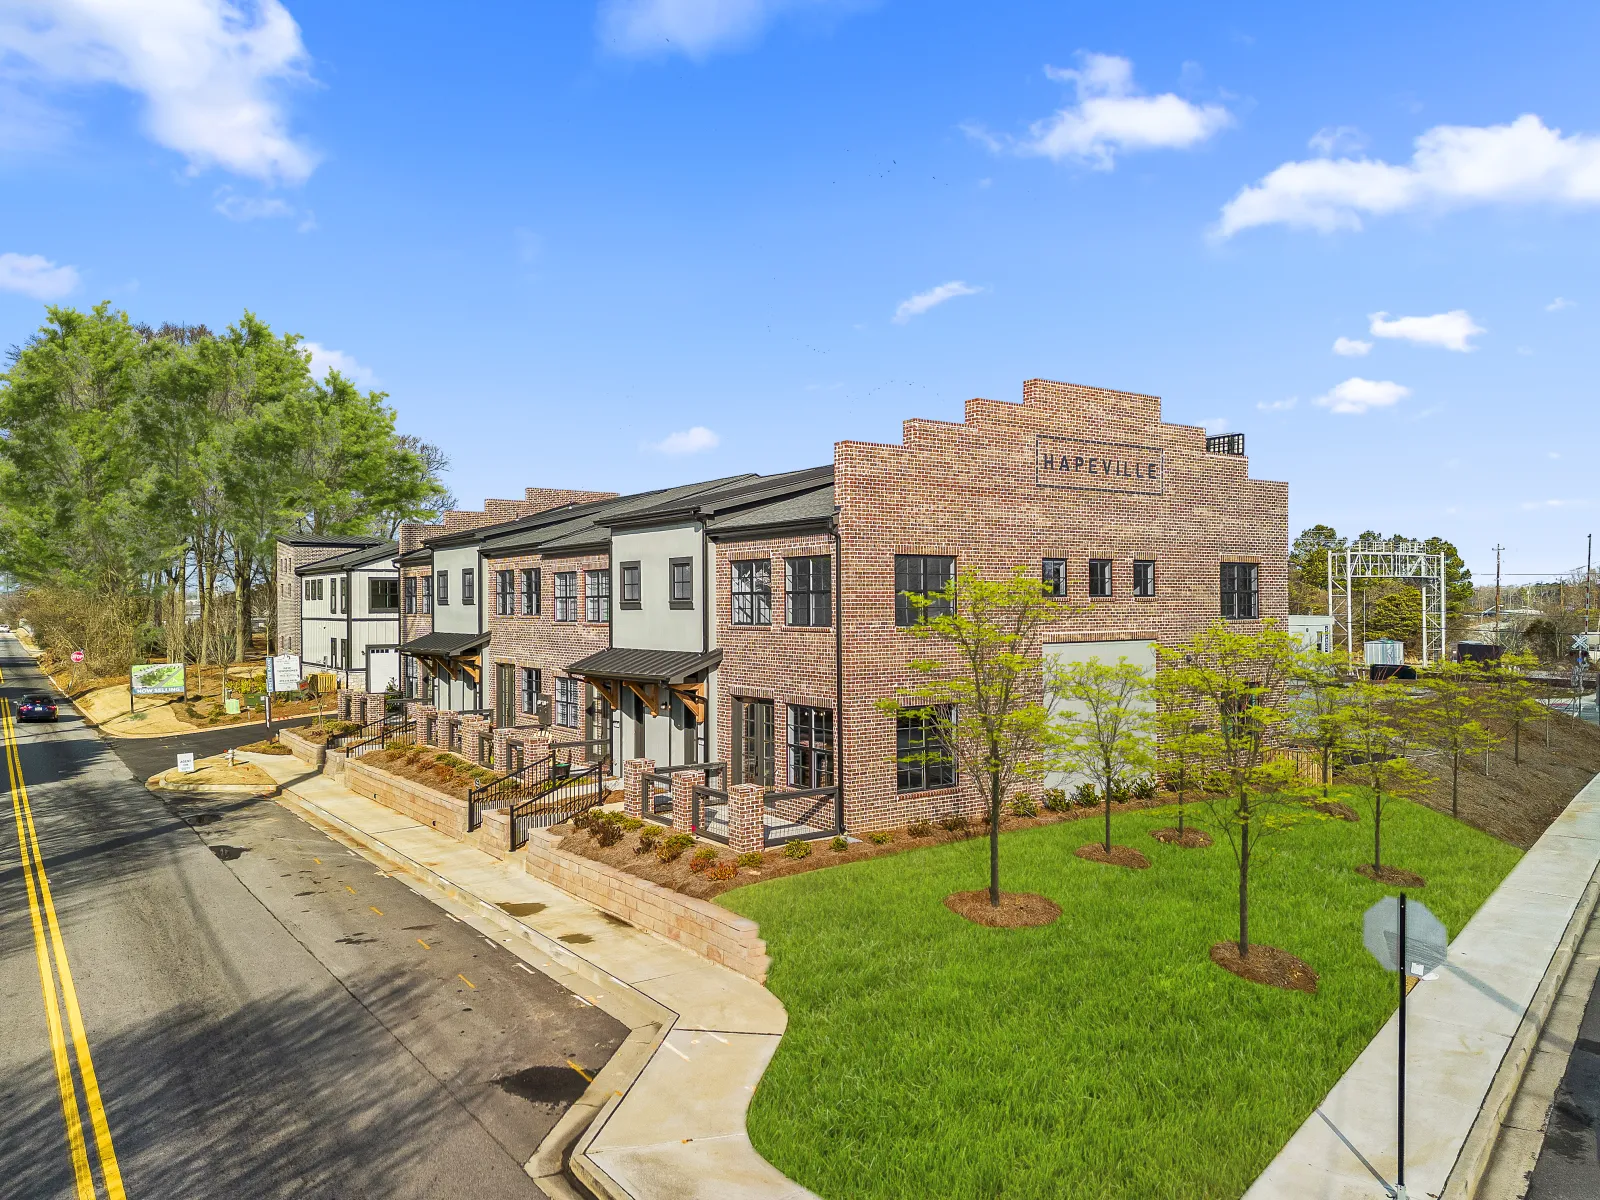 exterior view of Serenity townhomes in Hapeville